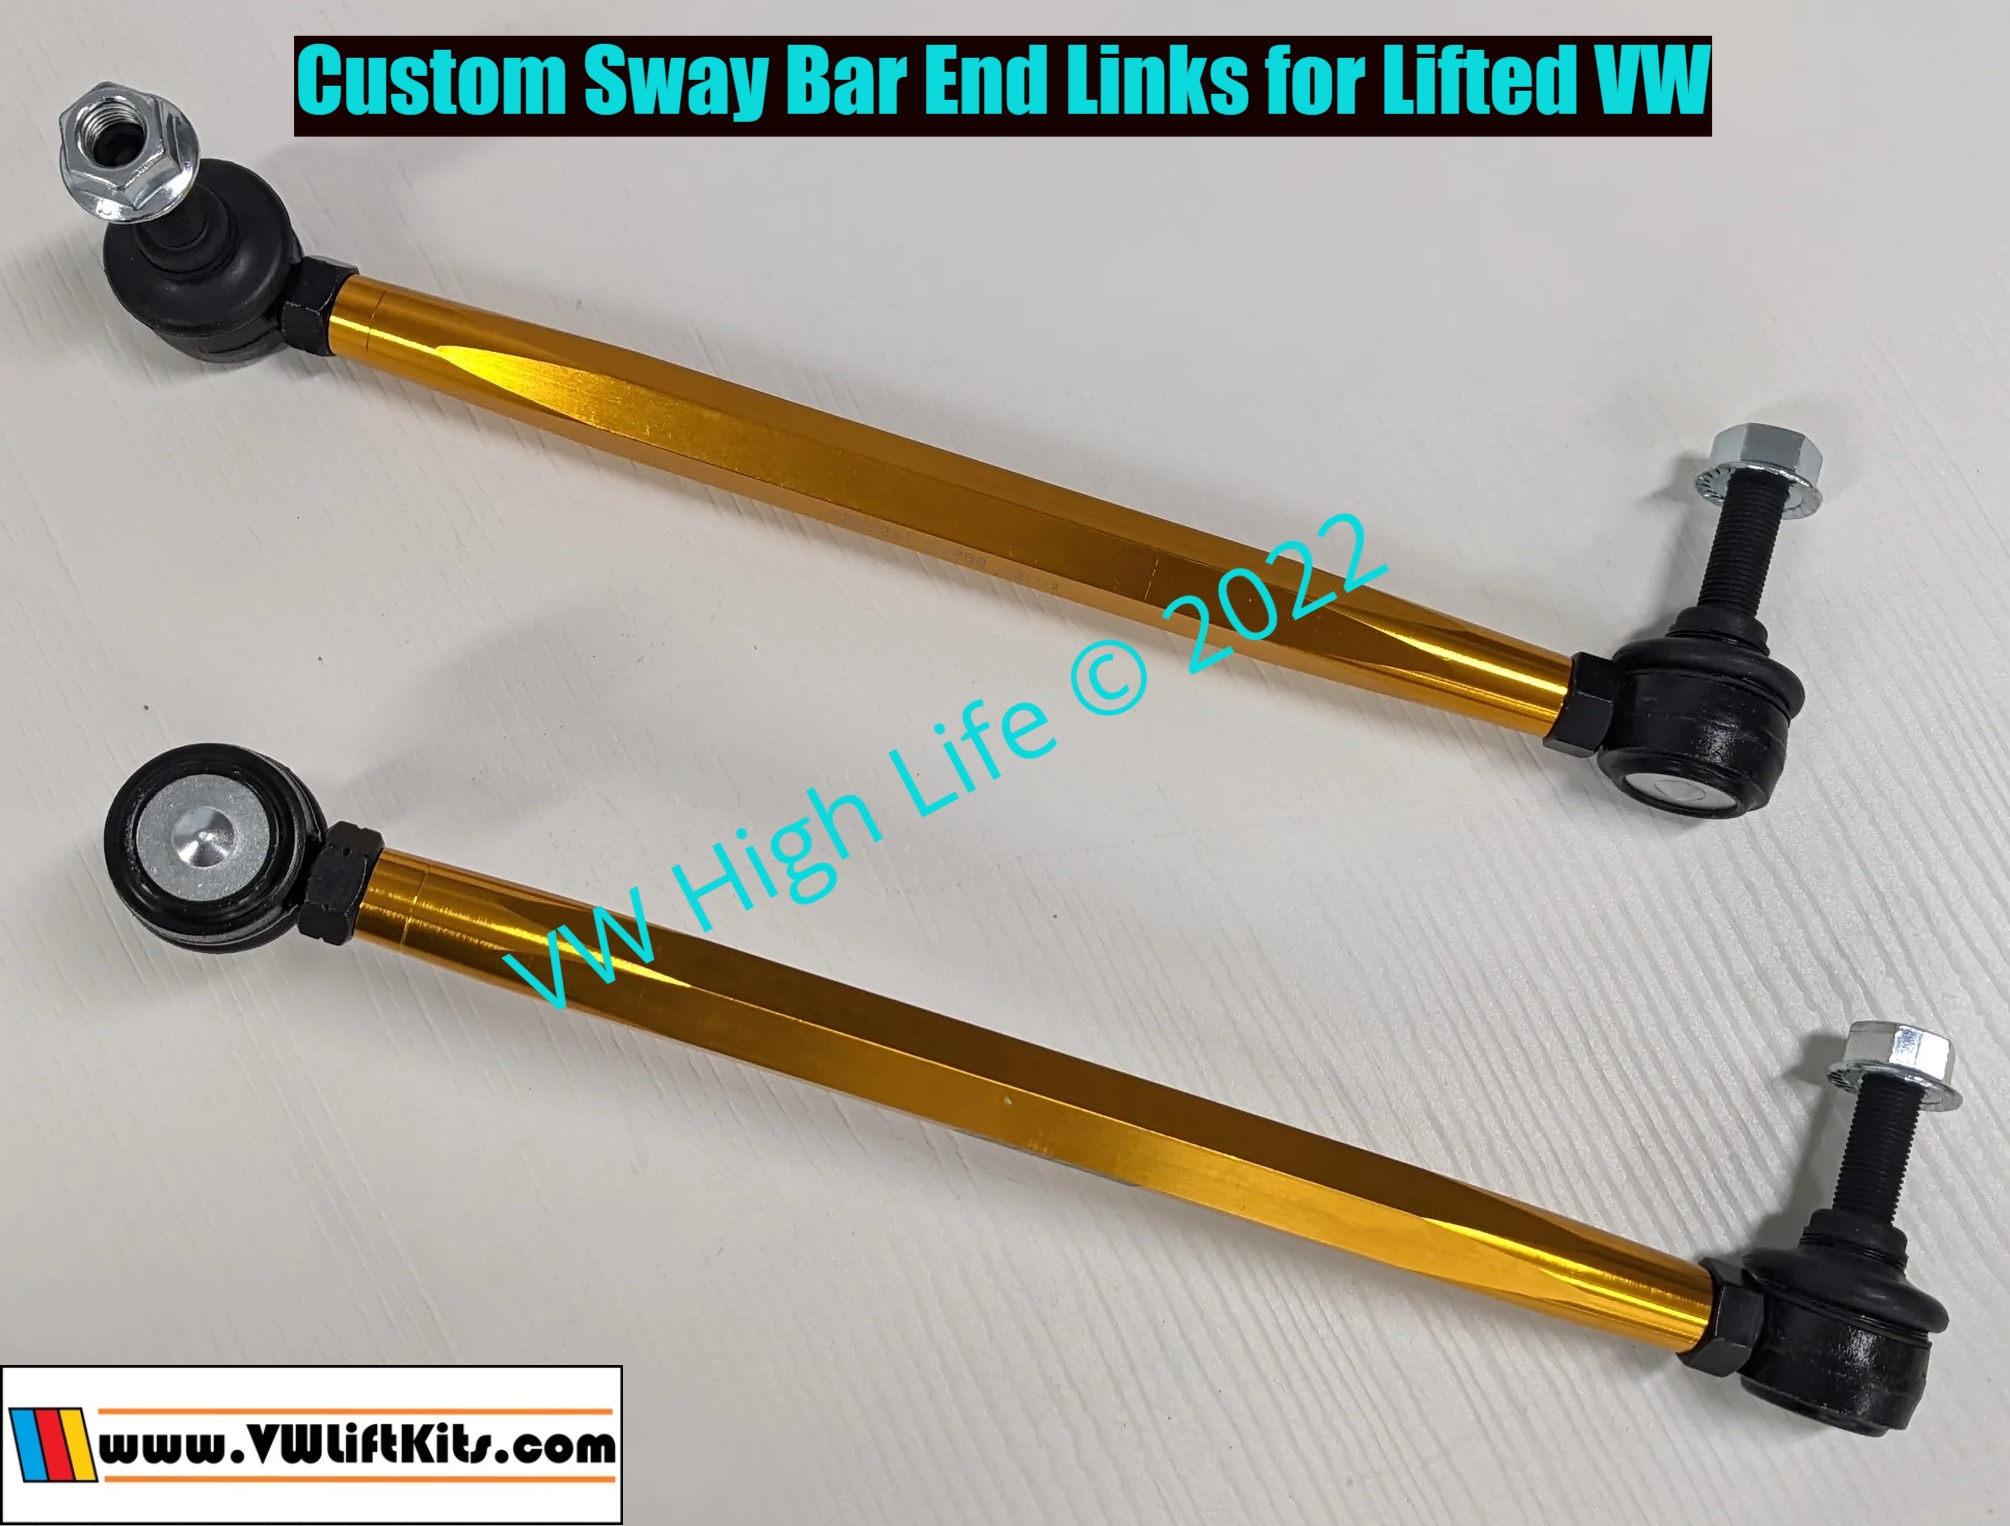 Custom Extended Sway Bar End Links for Lifted Volkswagen Vehicles